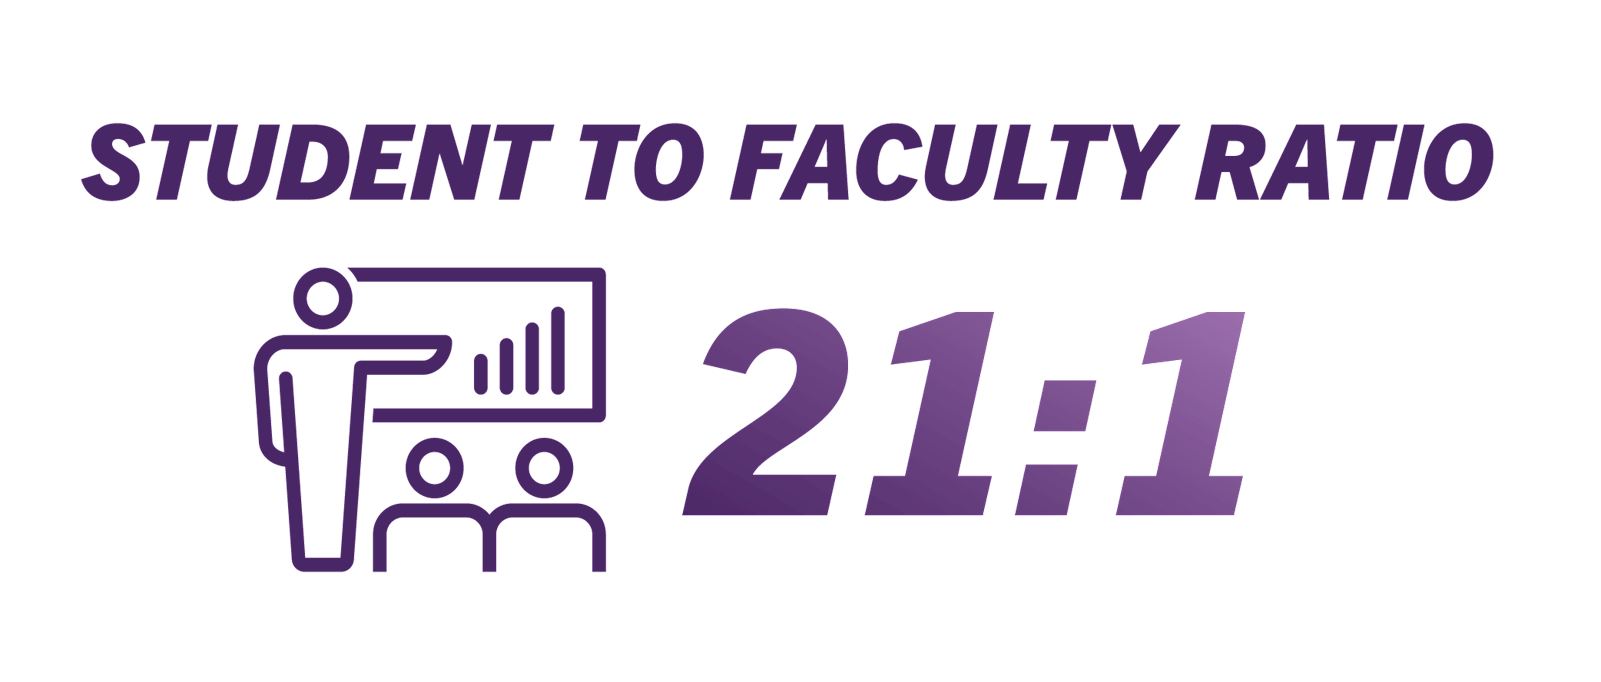 Student to faculty ratio is 21 to 1.